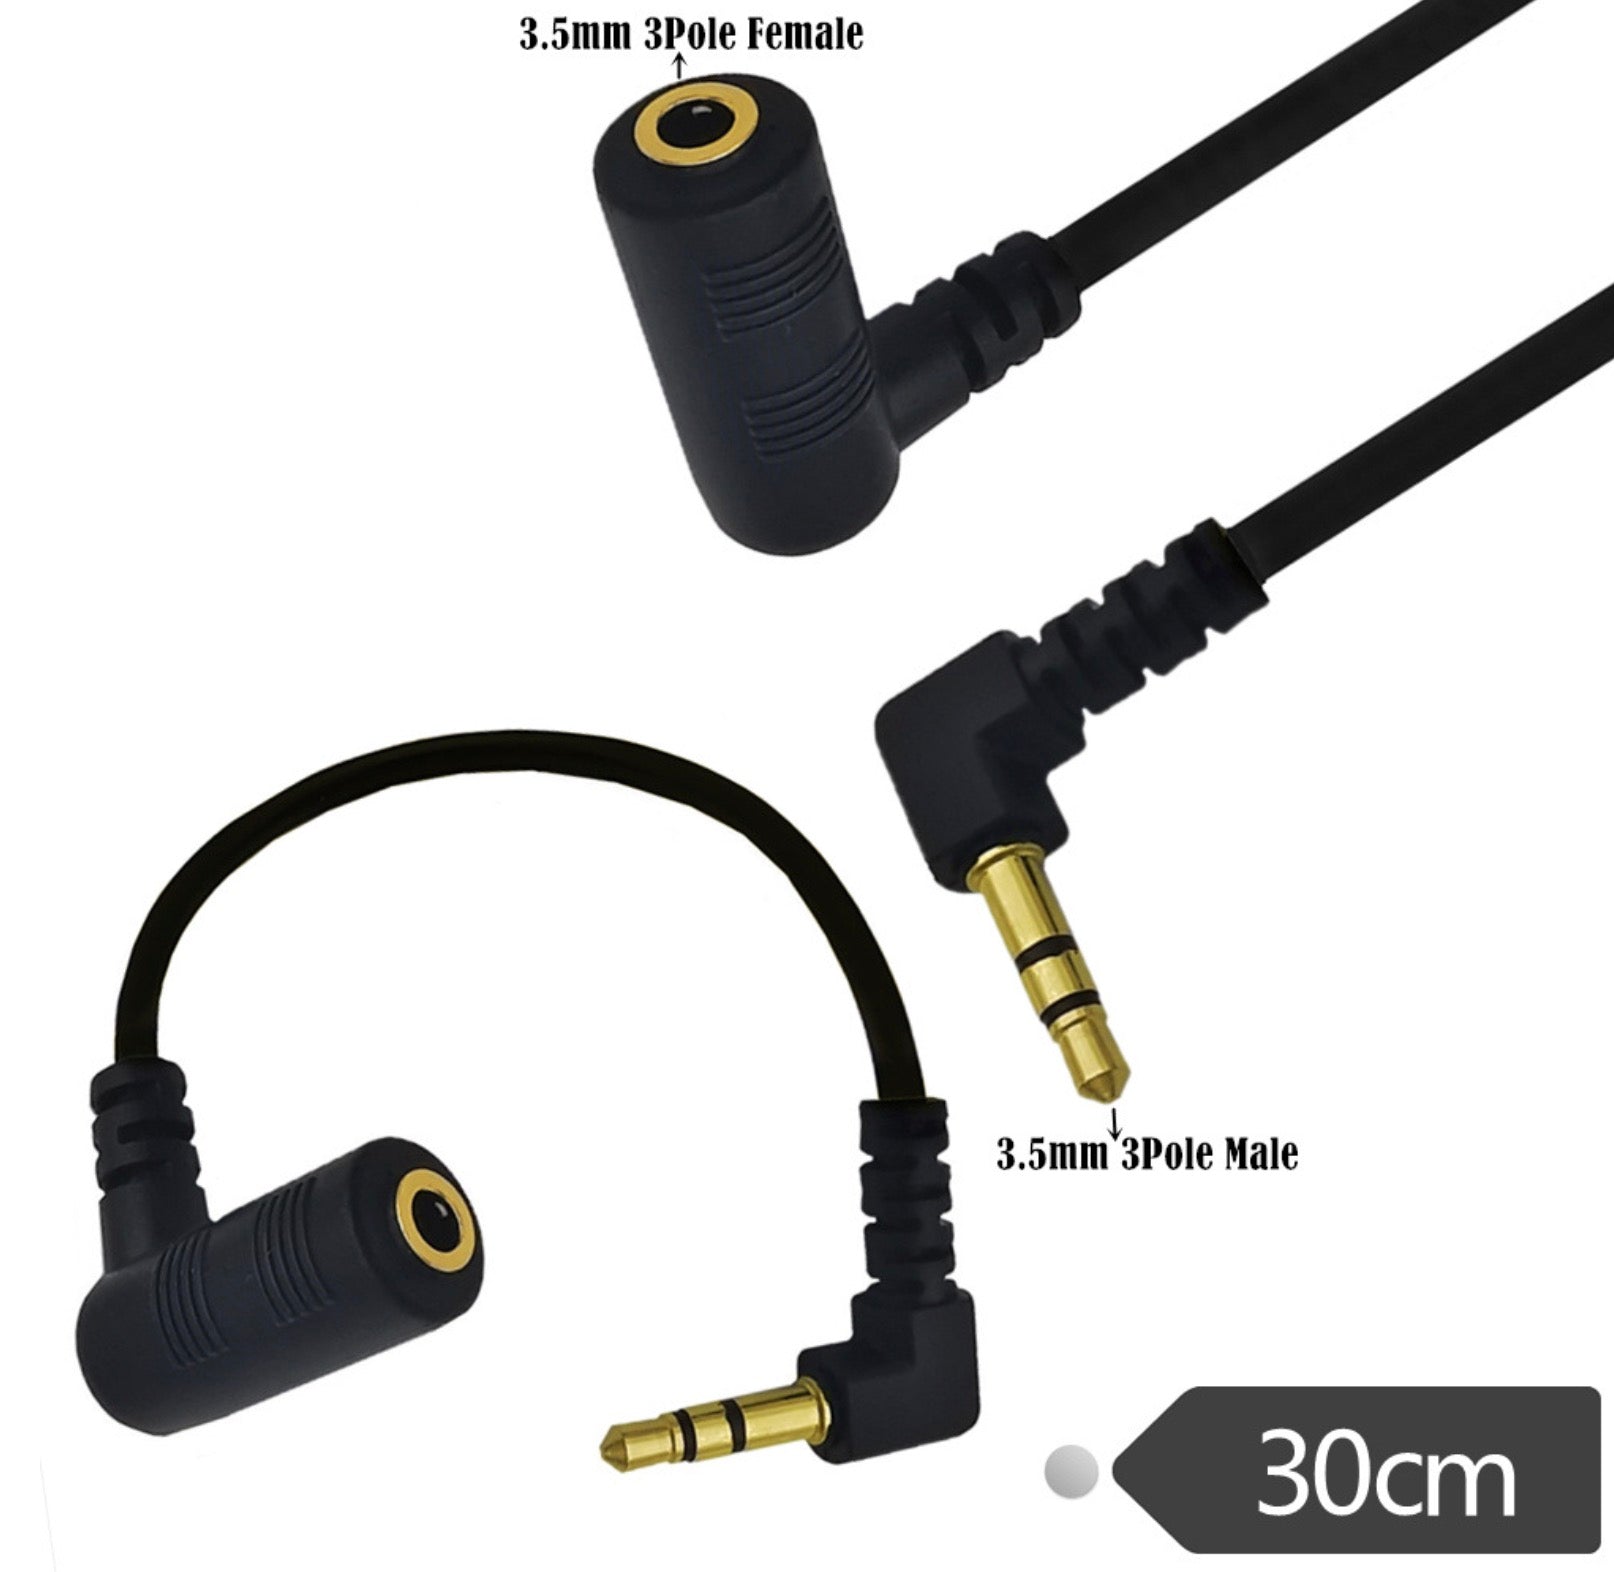 3.5mm Angled 3 Pole TRS Audio Stereo Male to Female Extension Cable